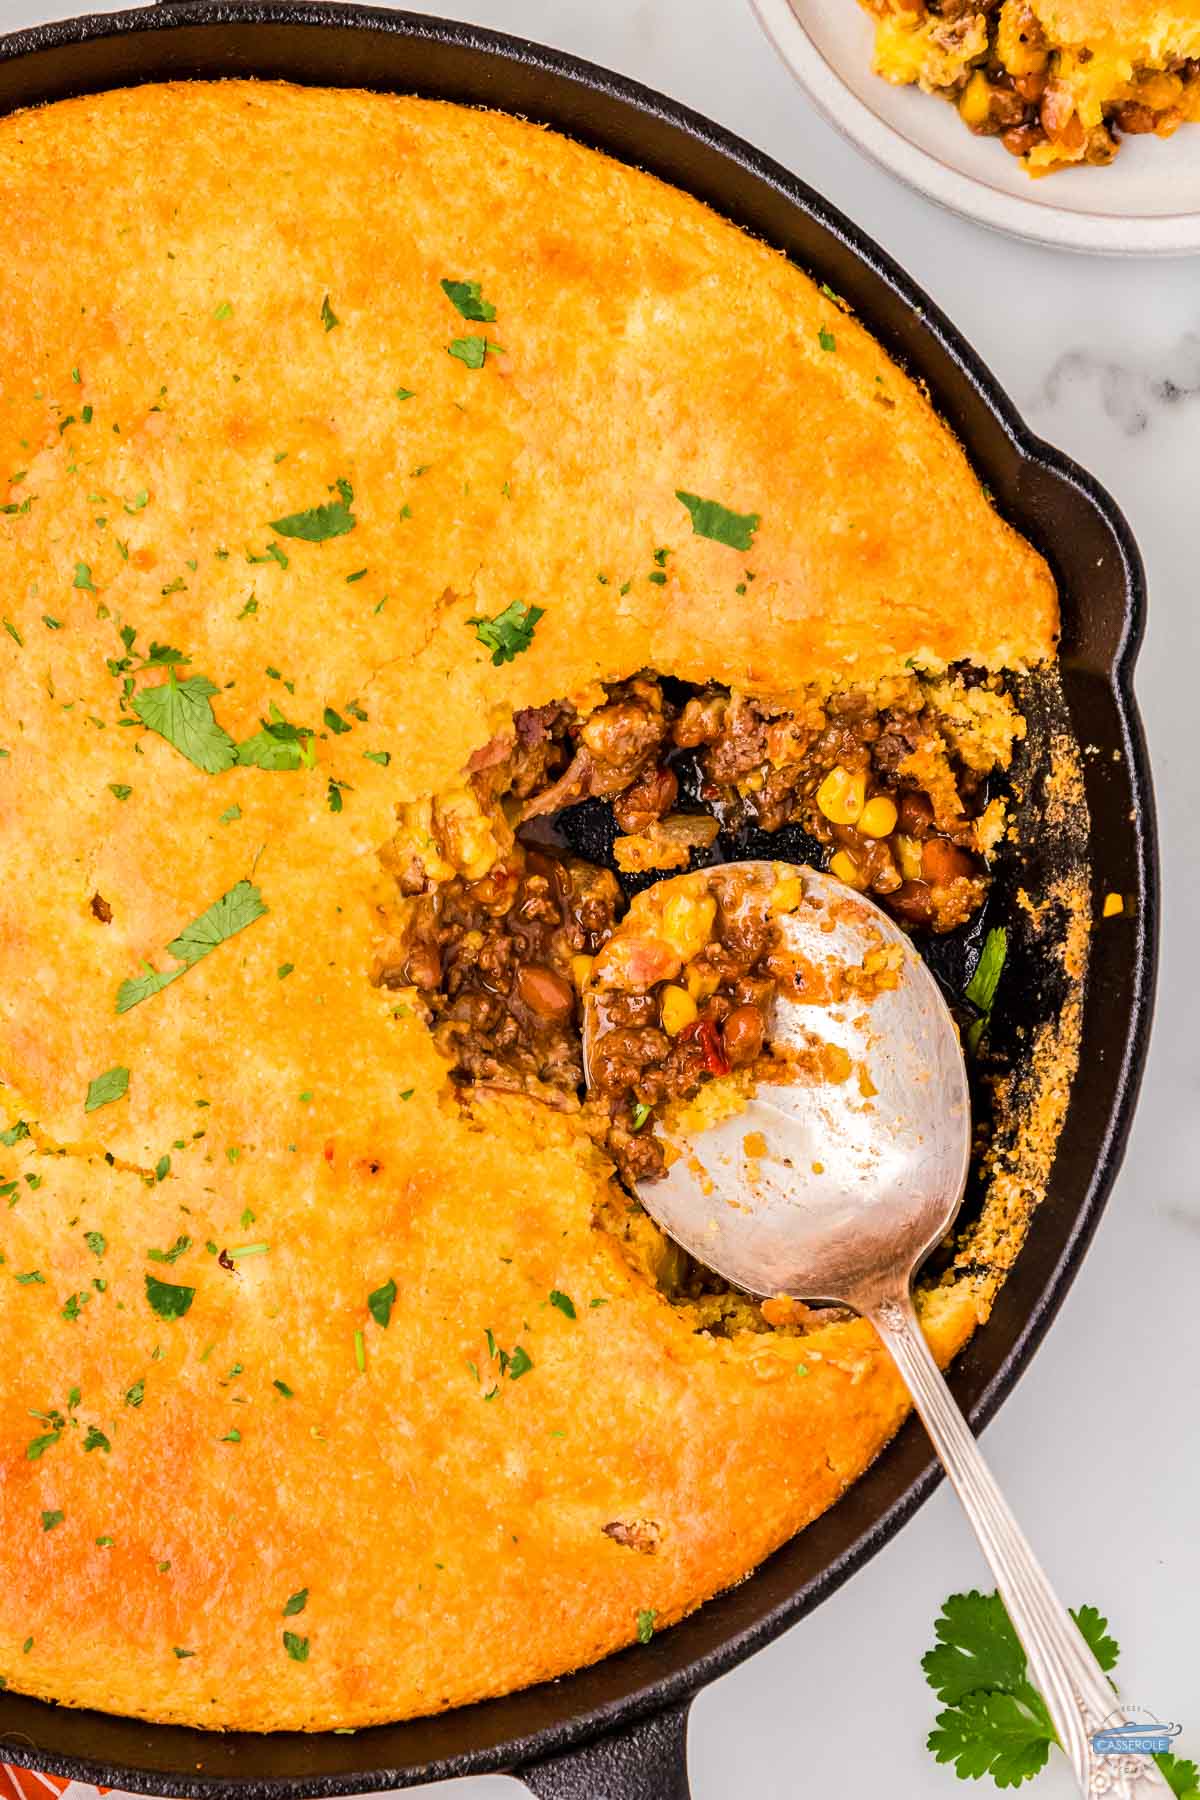 spoon scooping out cornbread cowboy casserole from a skillet